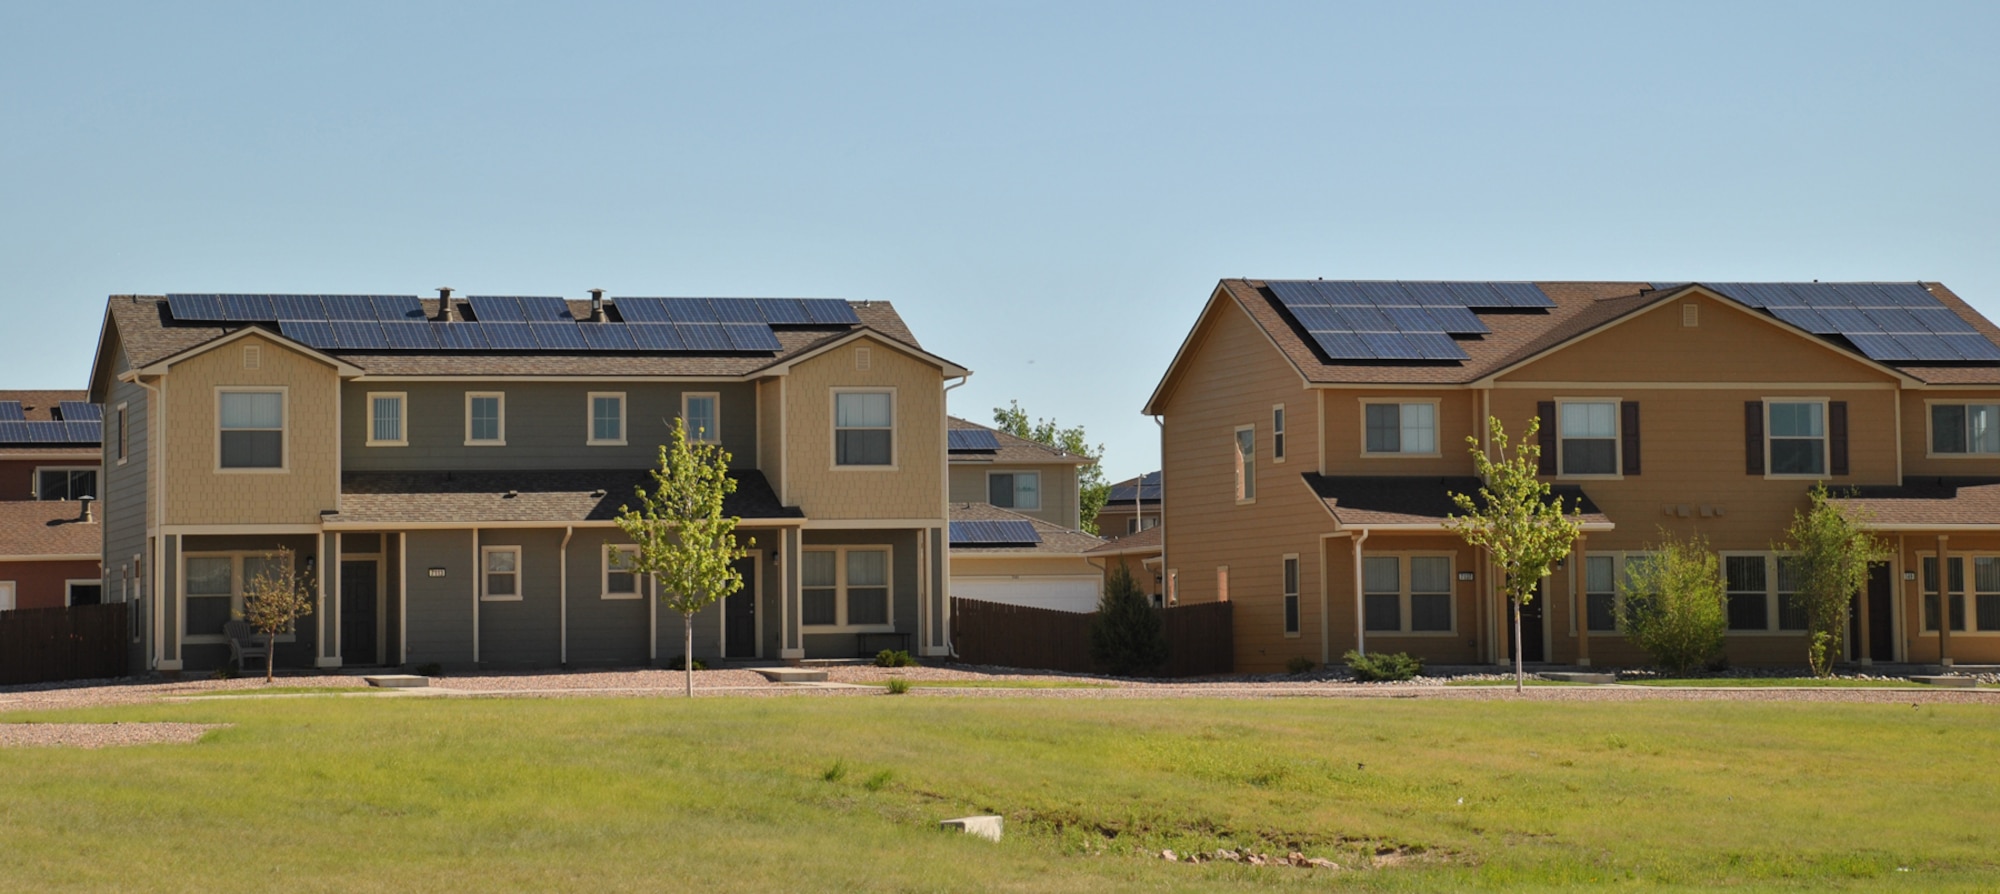 Duplex housing at Peterson Air Force Base, Colorado, features rooftop solar panels. The homes are part of the Air Force Housing Privatization program portfolio, which is managed by the Air Force Civil Engineer Center. (U.S. Air Force photo/Carole Chiles Fuller)